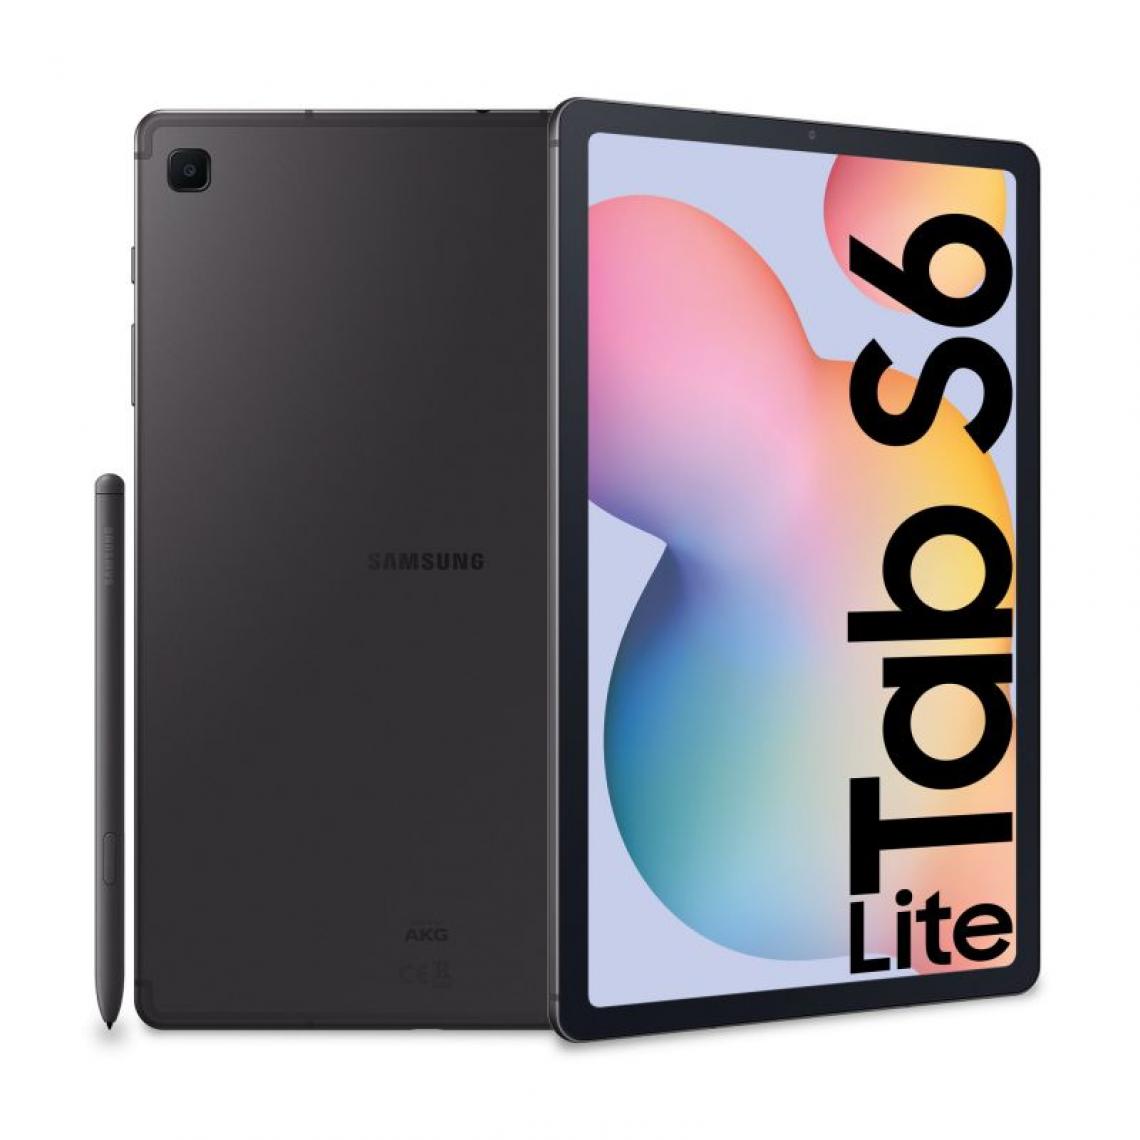 Inconnu - Samsung Galaxy Tab S6 Lite SM-P615 4G LTE 64 Go 26,4 cm (10.4``) Samsung Exynos 4 Go Wi-Fi 5 (802.11ac) Android 11 Gris - Tablette Android